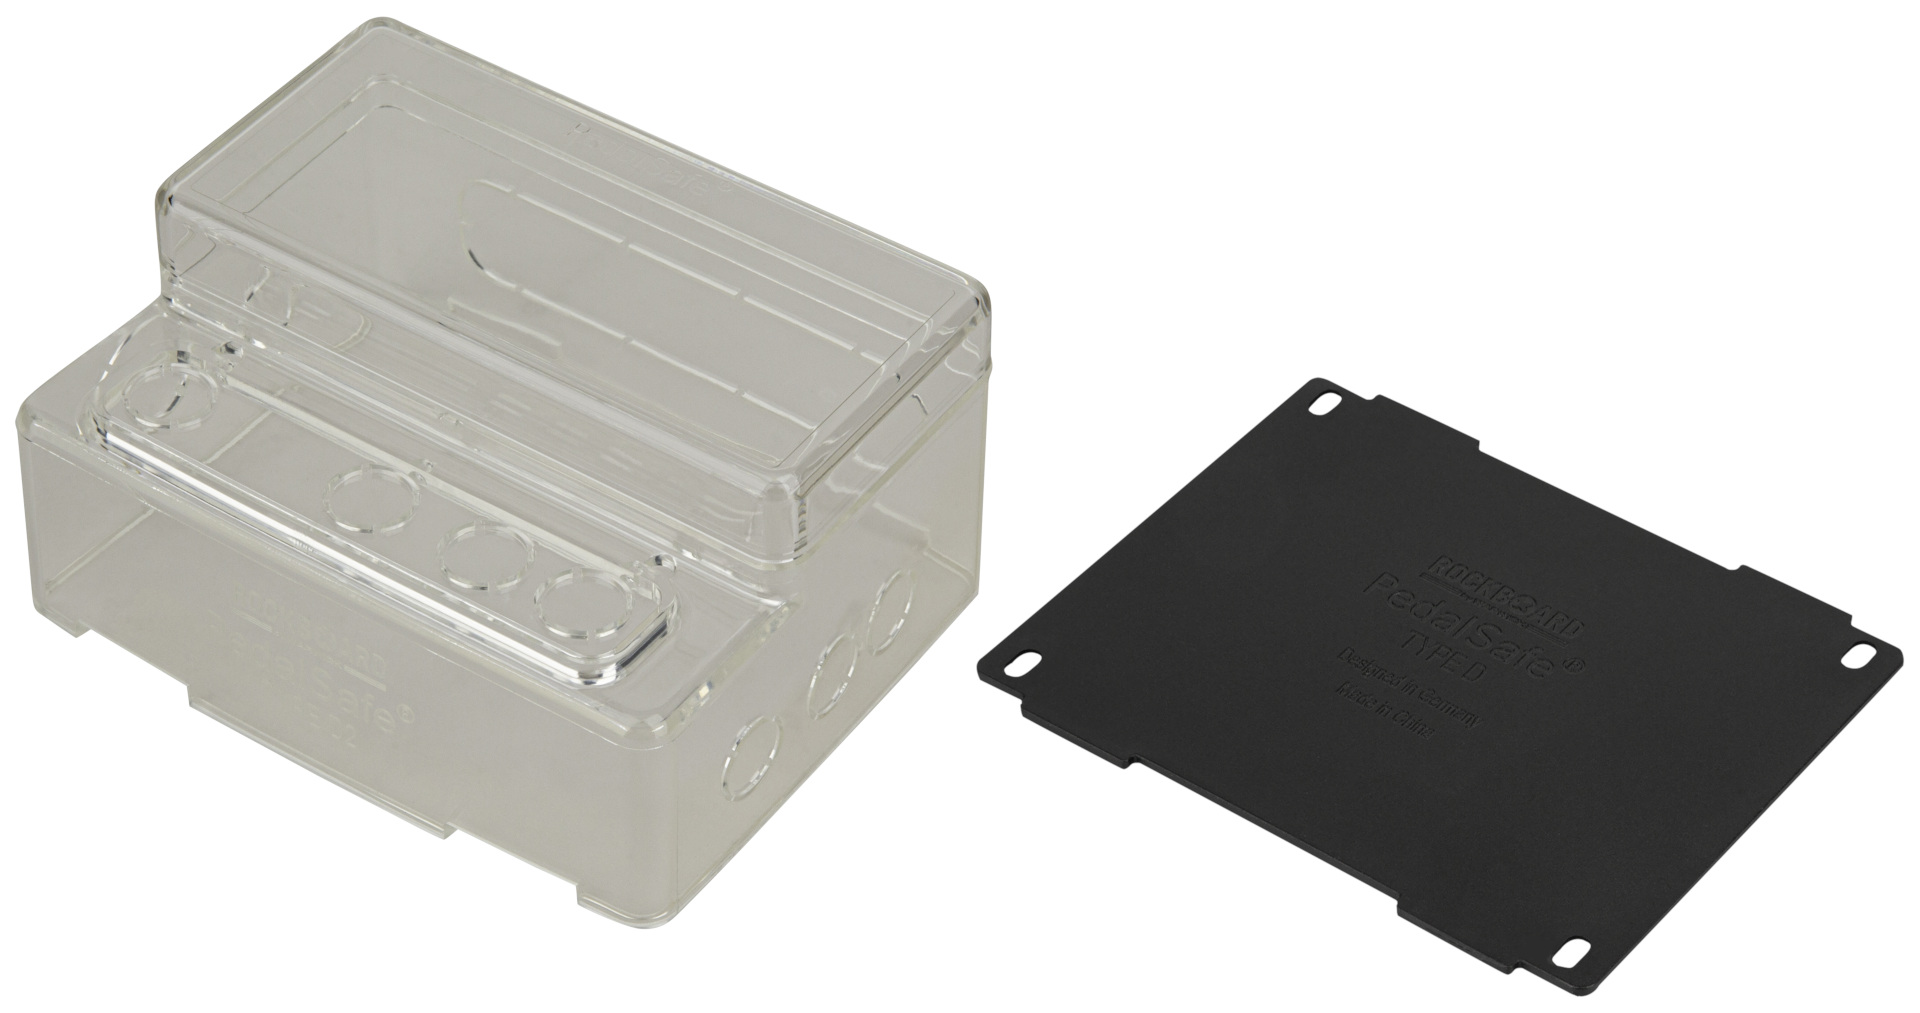 RockBoard PedalSafe Type D2 - Protective Cover And Universal Mounting Plate For Large Horizontal Pedals